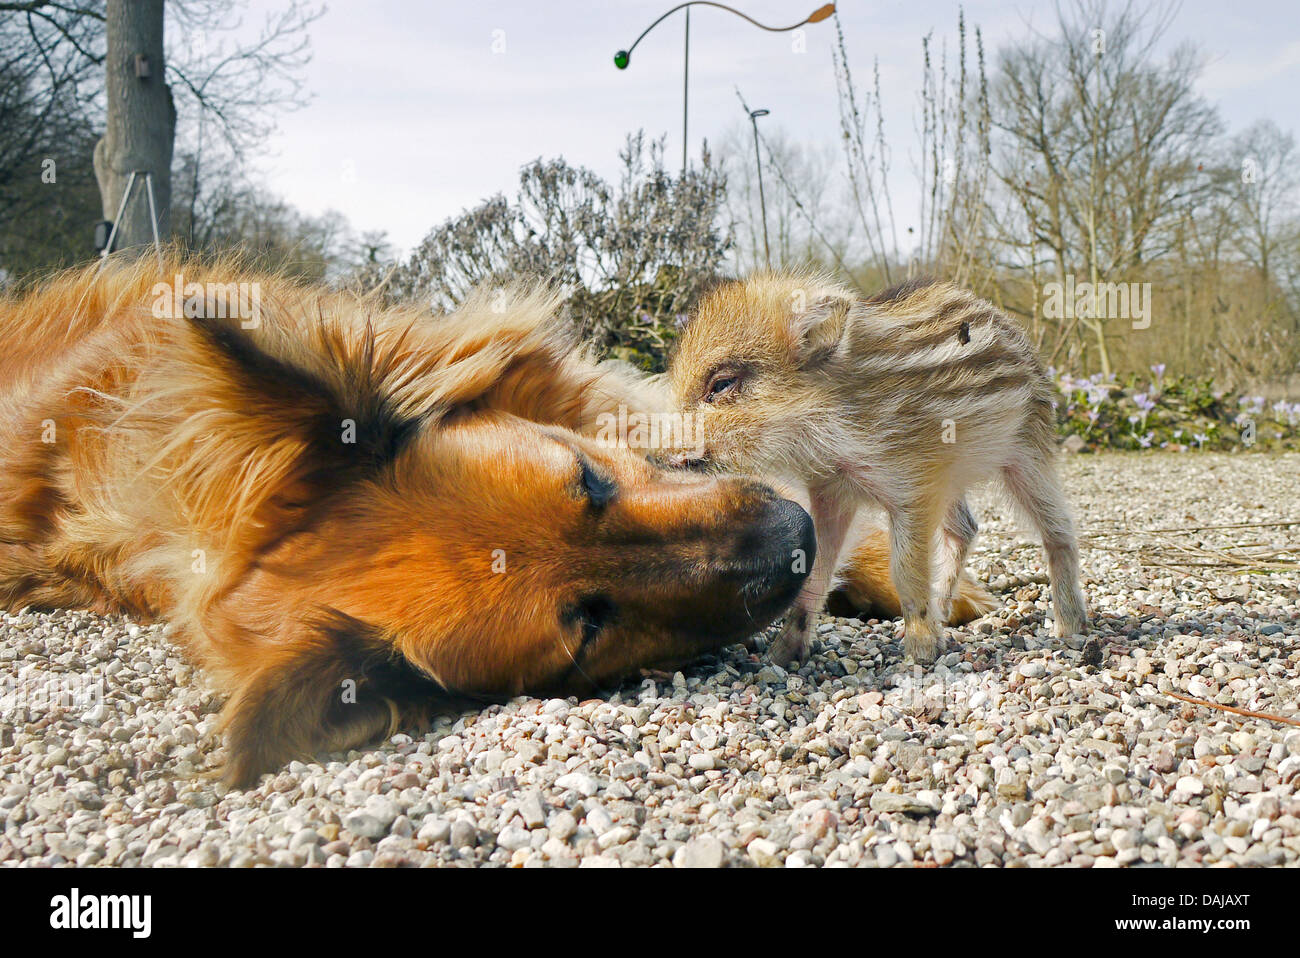 wild boar, pig, wild boar (Sus scrofa), shote playing with a dog in the garden, Germany Stock Photo